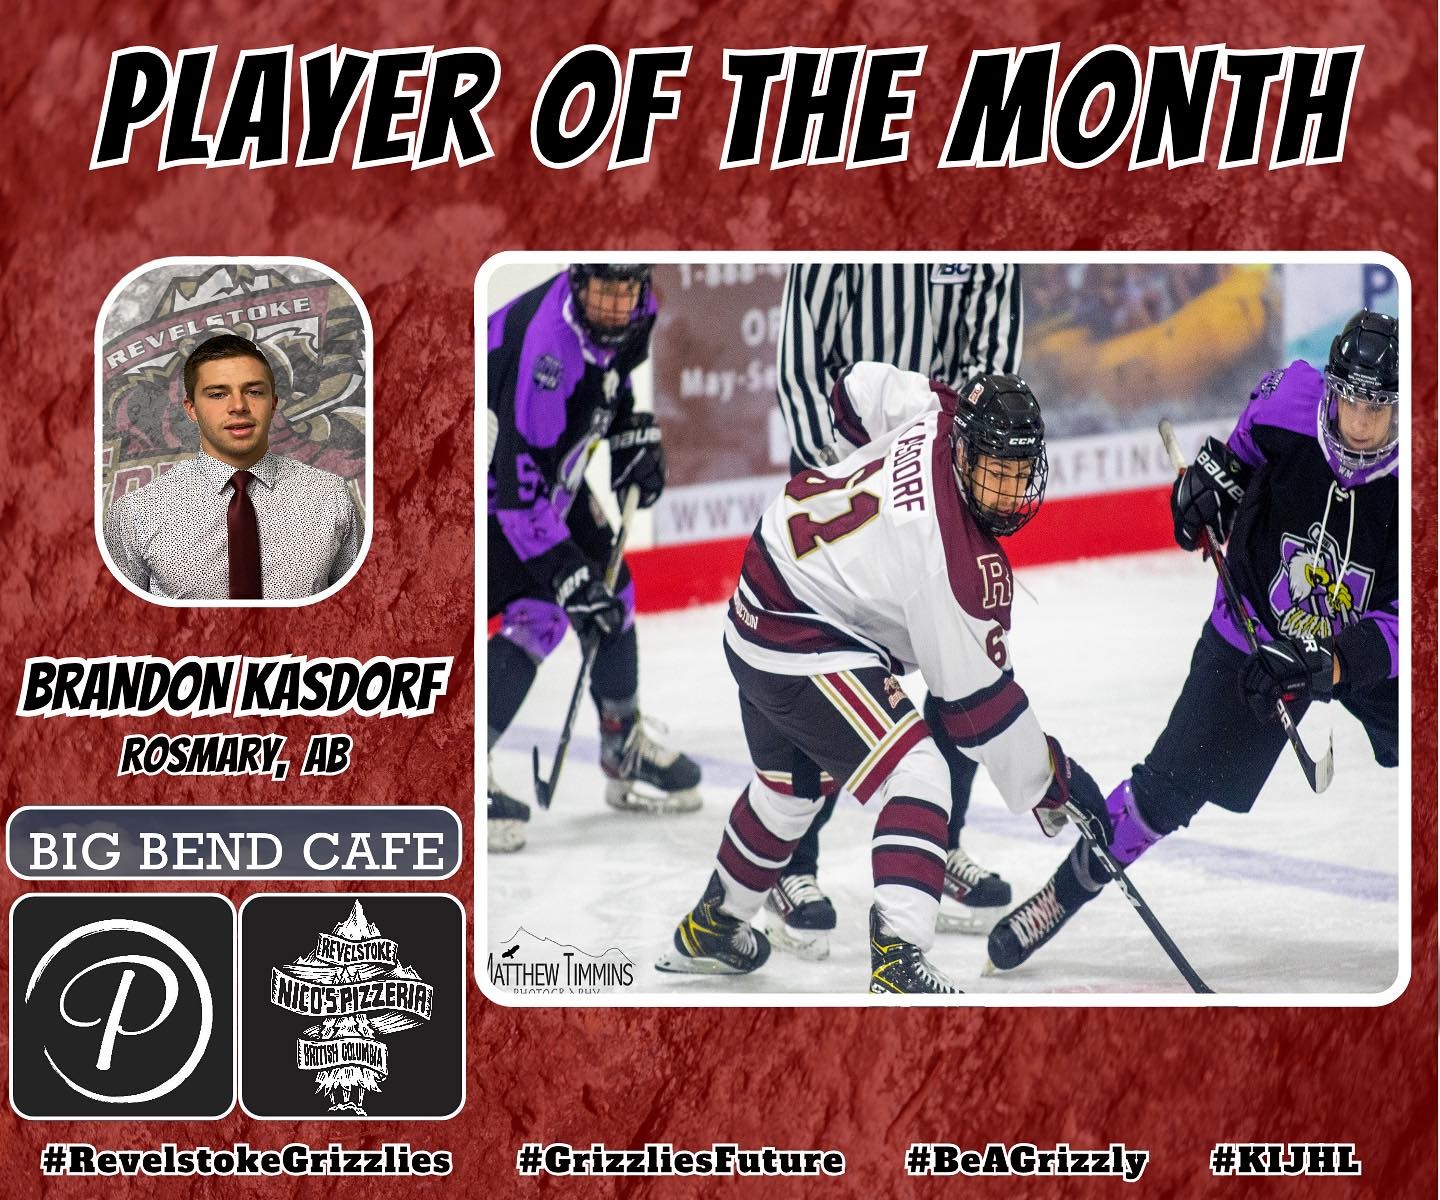 Congratulations Brandon Kasdorf for being our November Player of the Month. 

Our Player of the month is supported by @pureimagehair and @bigbendcafe and @nicospizzeria_revelstoke

Thank you for your support. 

📸( @timminsphotos )

#RevelstokeGrizzlies #BeAGrizzly #GrizzliesFuture #KIJHL #PlayerOfTheMonth